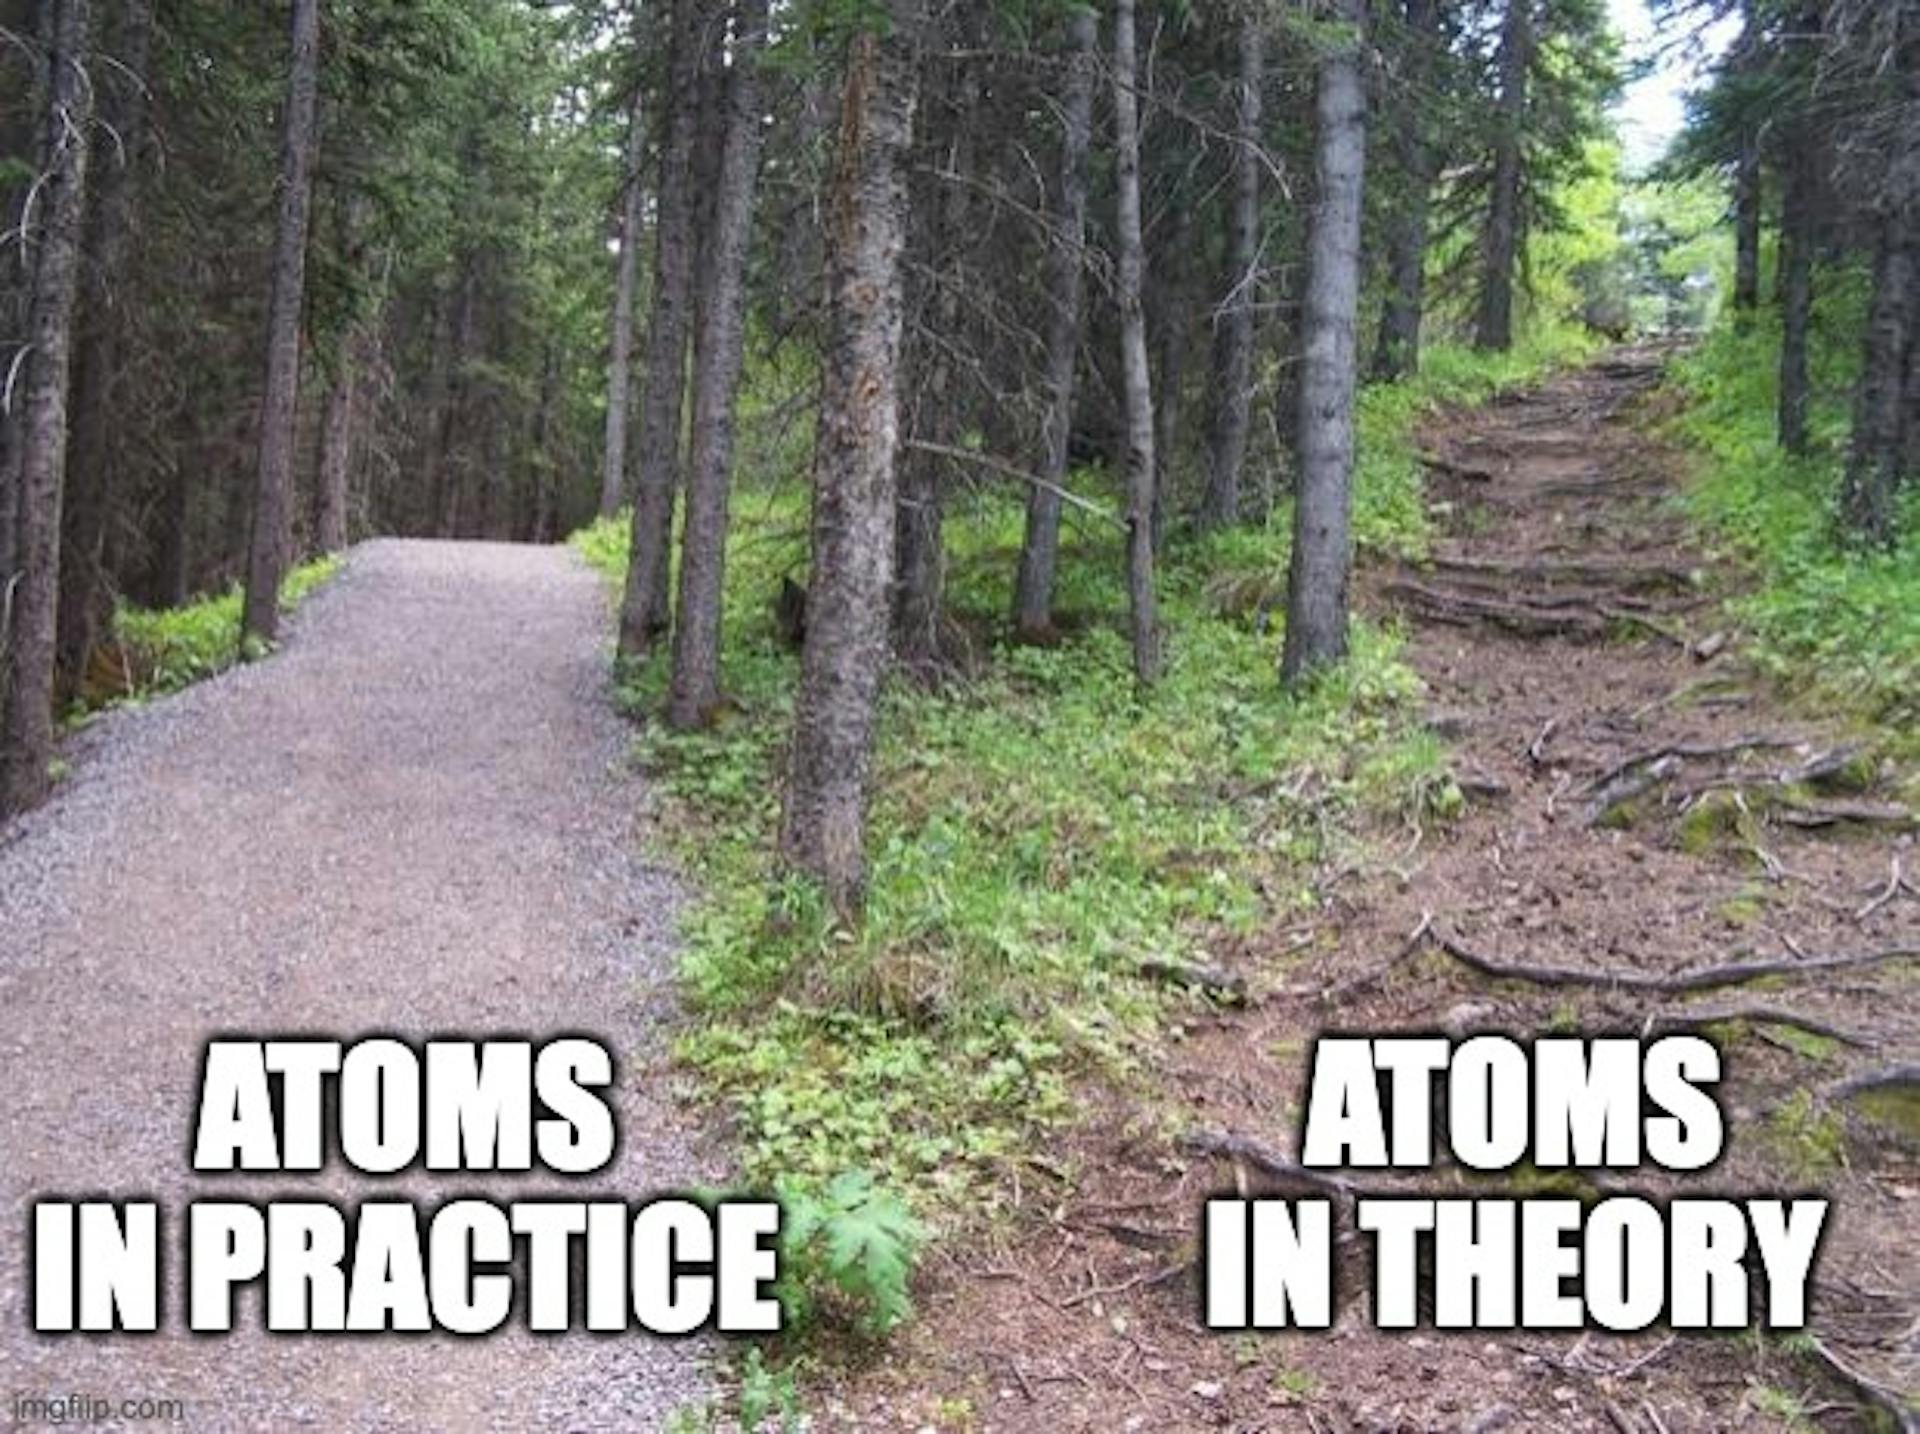 Atoms in Theory vs Atoms in Practice